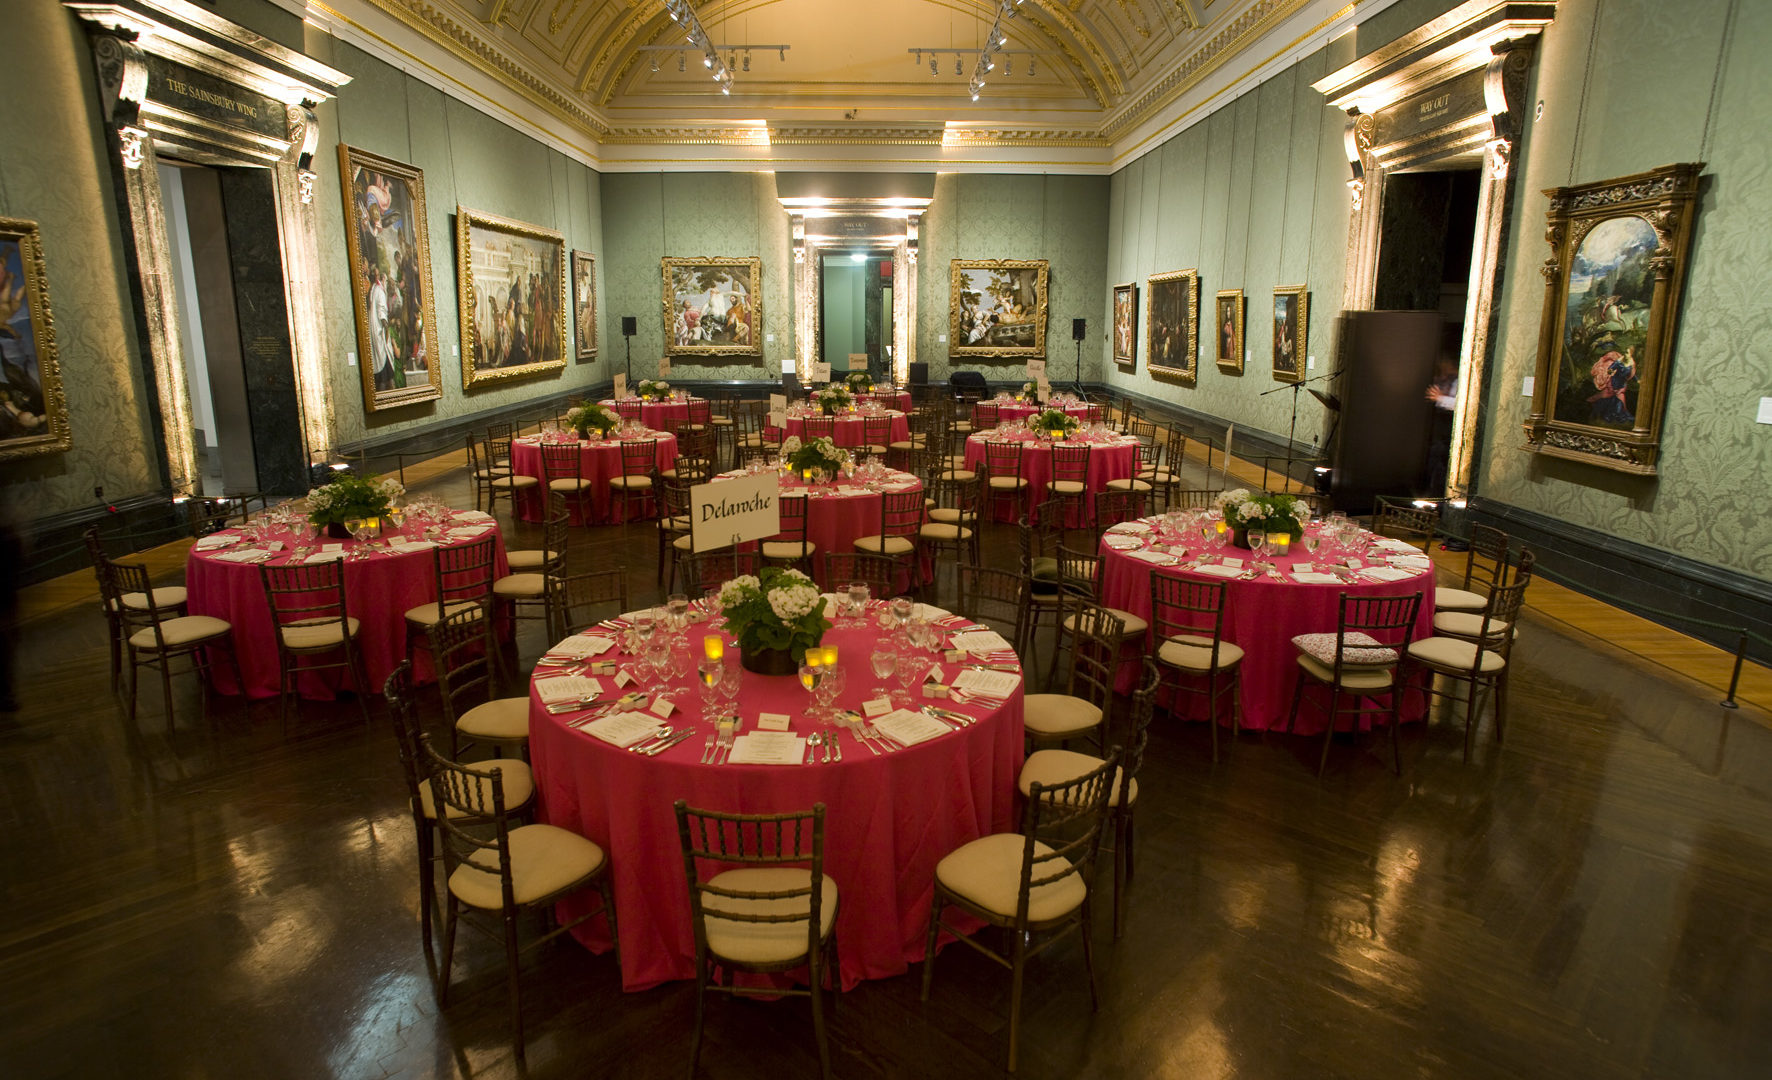 National Dining Rooms National Gallery - Bond 45 - National Harbor - University of bristol strategy launch, aladdin press night party, official venue hire launch.